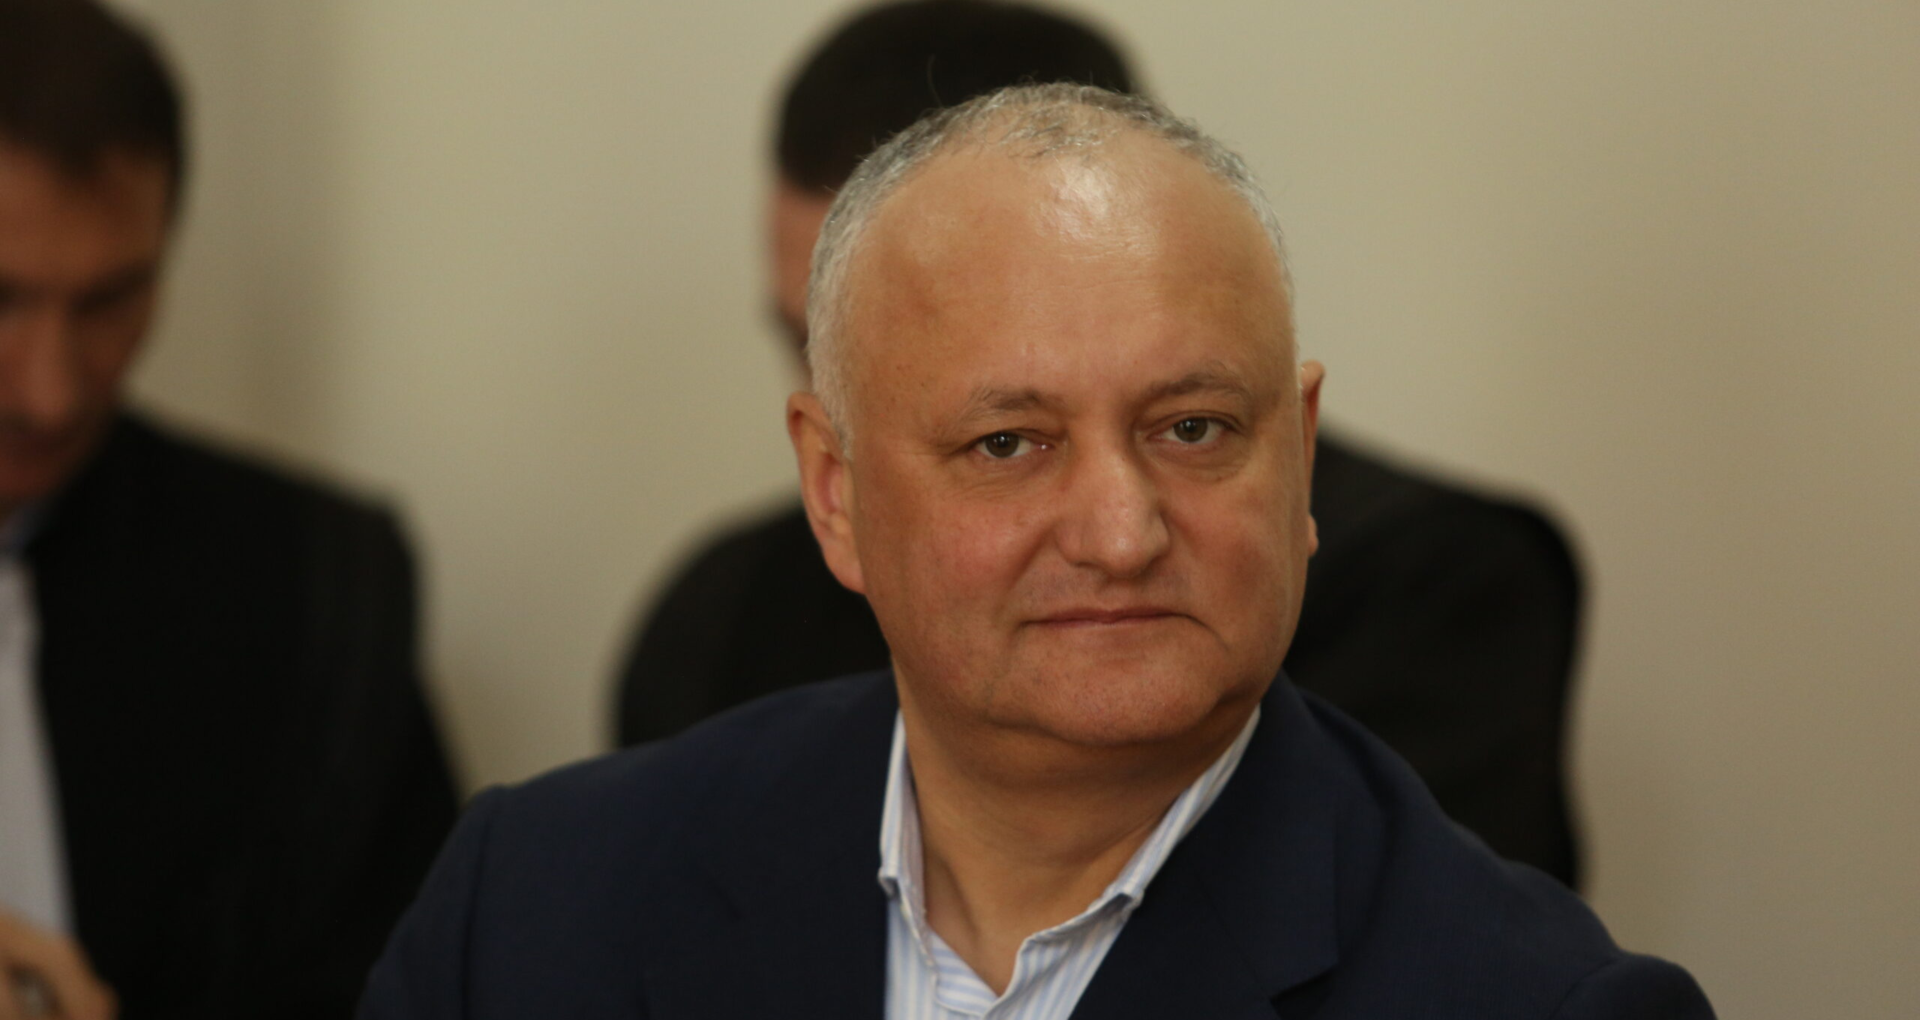 Difference of over 8 MILLION lei between declared and real income. The criminal prosecution of a former head of the Health Department of the Chisinau City Hall, targeted in ZdG investigations, has been completed.